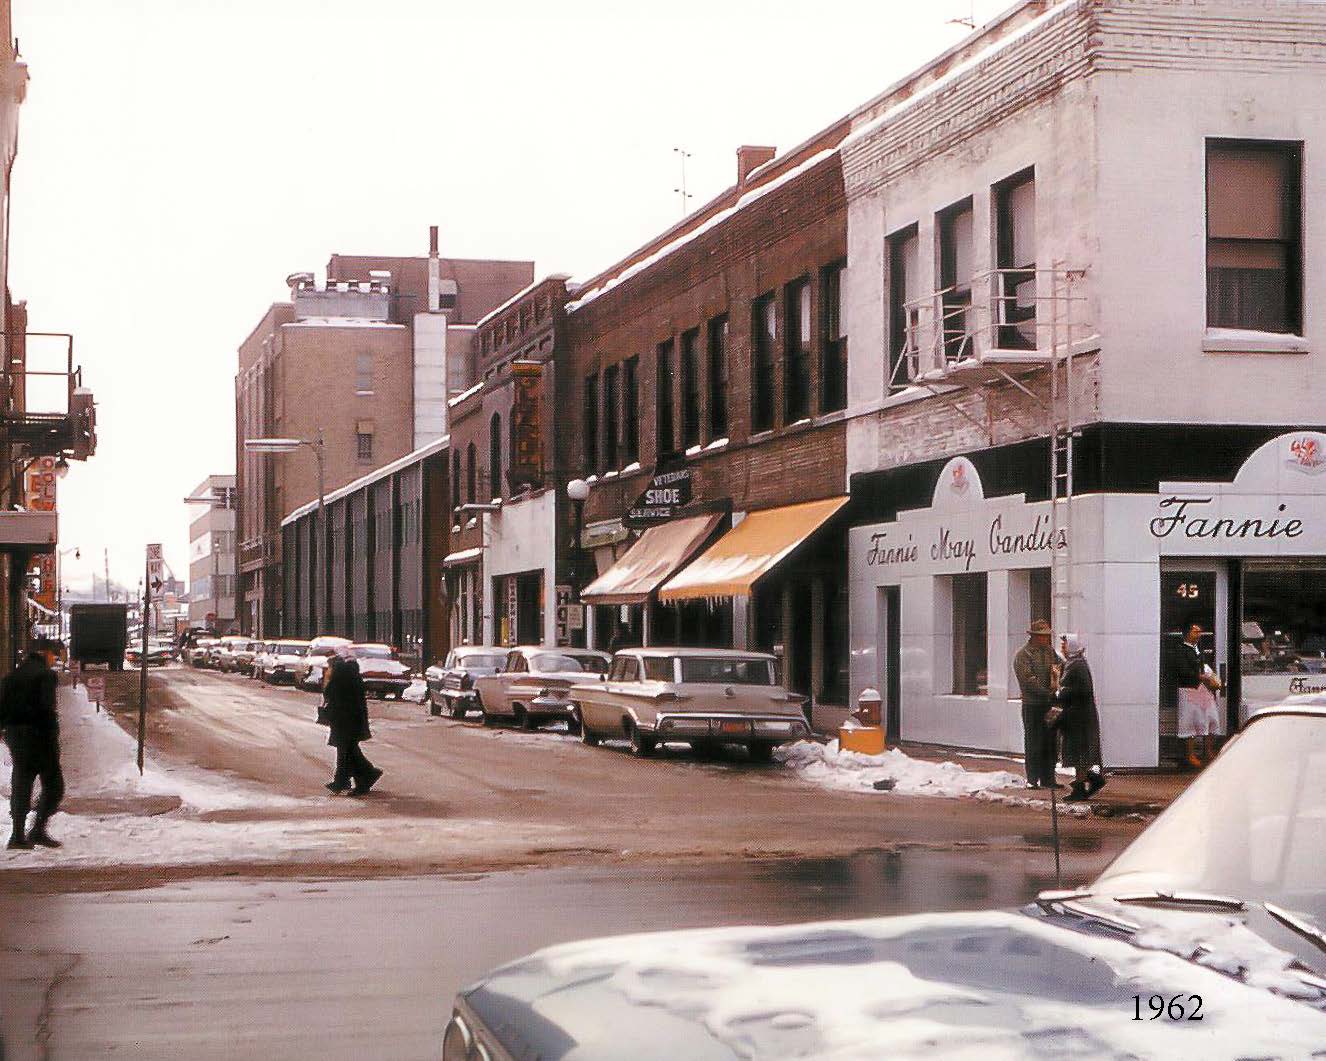 A photo from 1962 depicting a city street. 43 Galena is a Fannie May Candies company store.